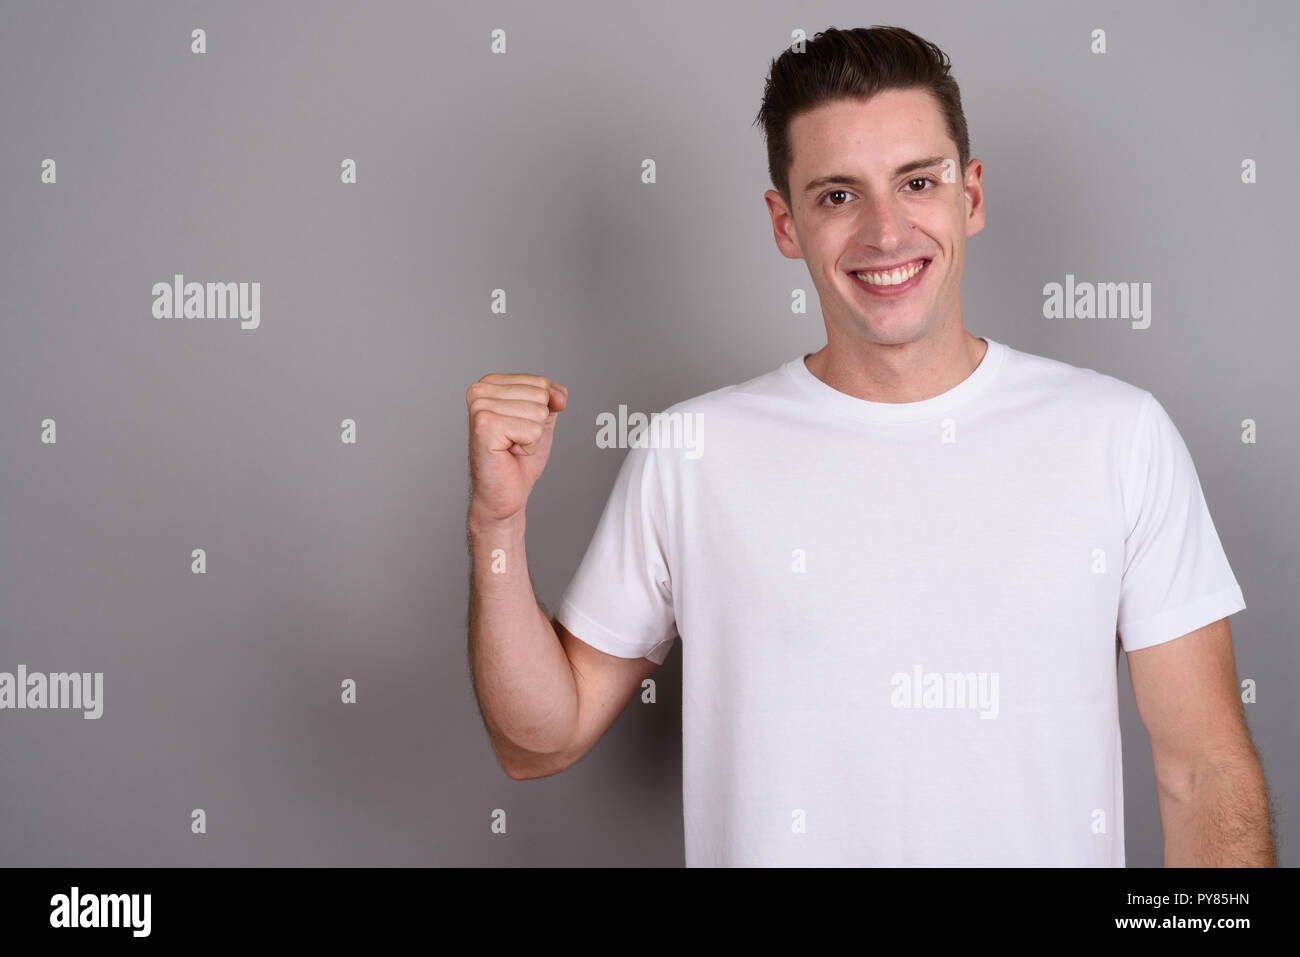 Young handsome man looking excited with arm raised Stock Photo